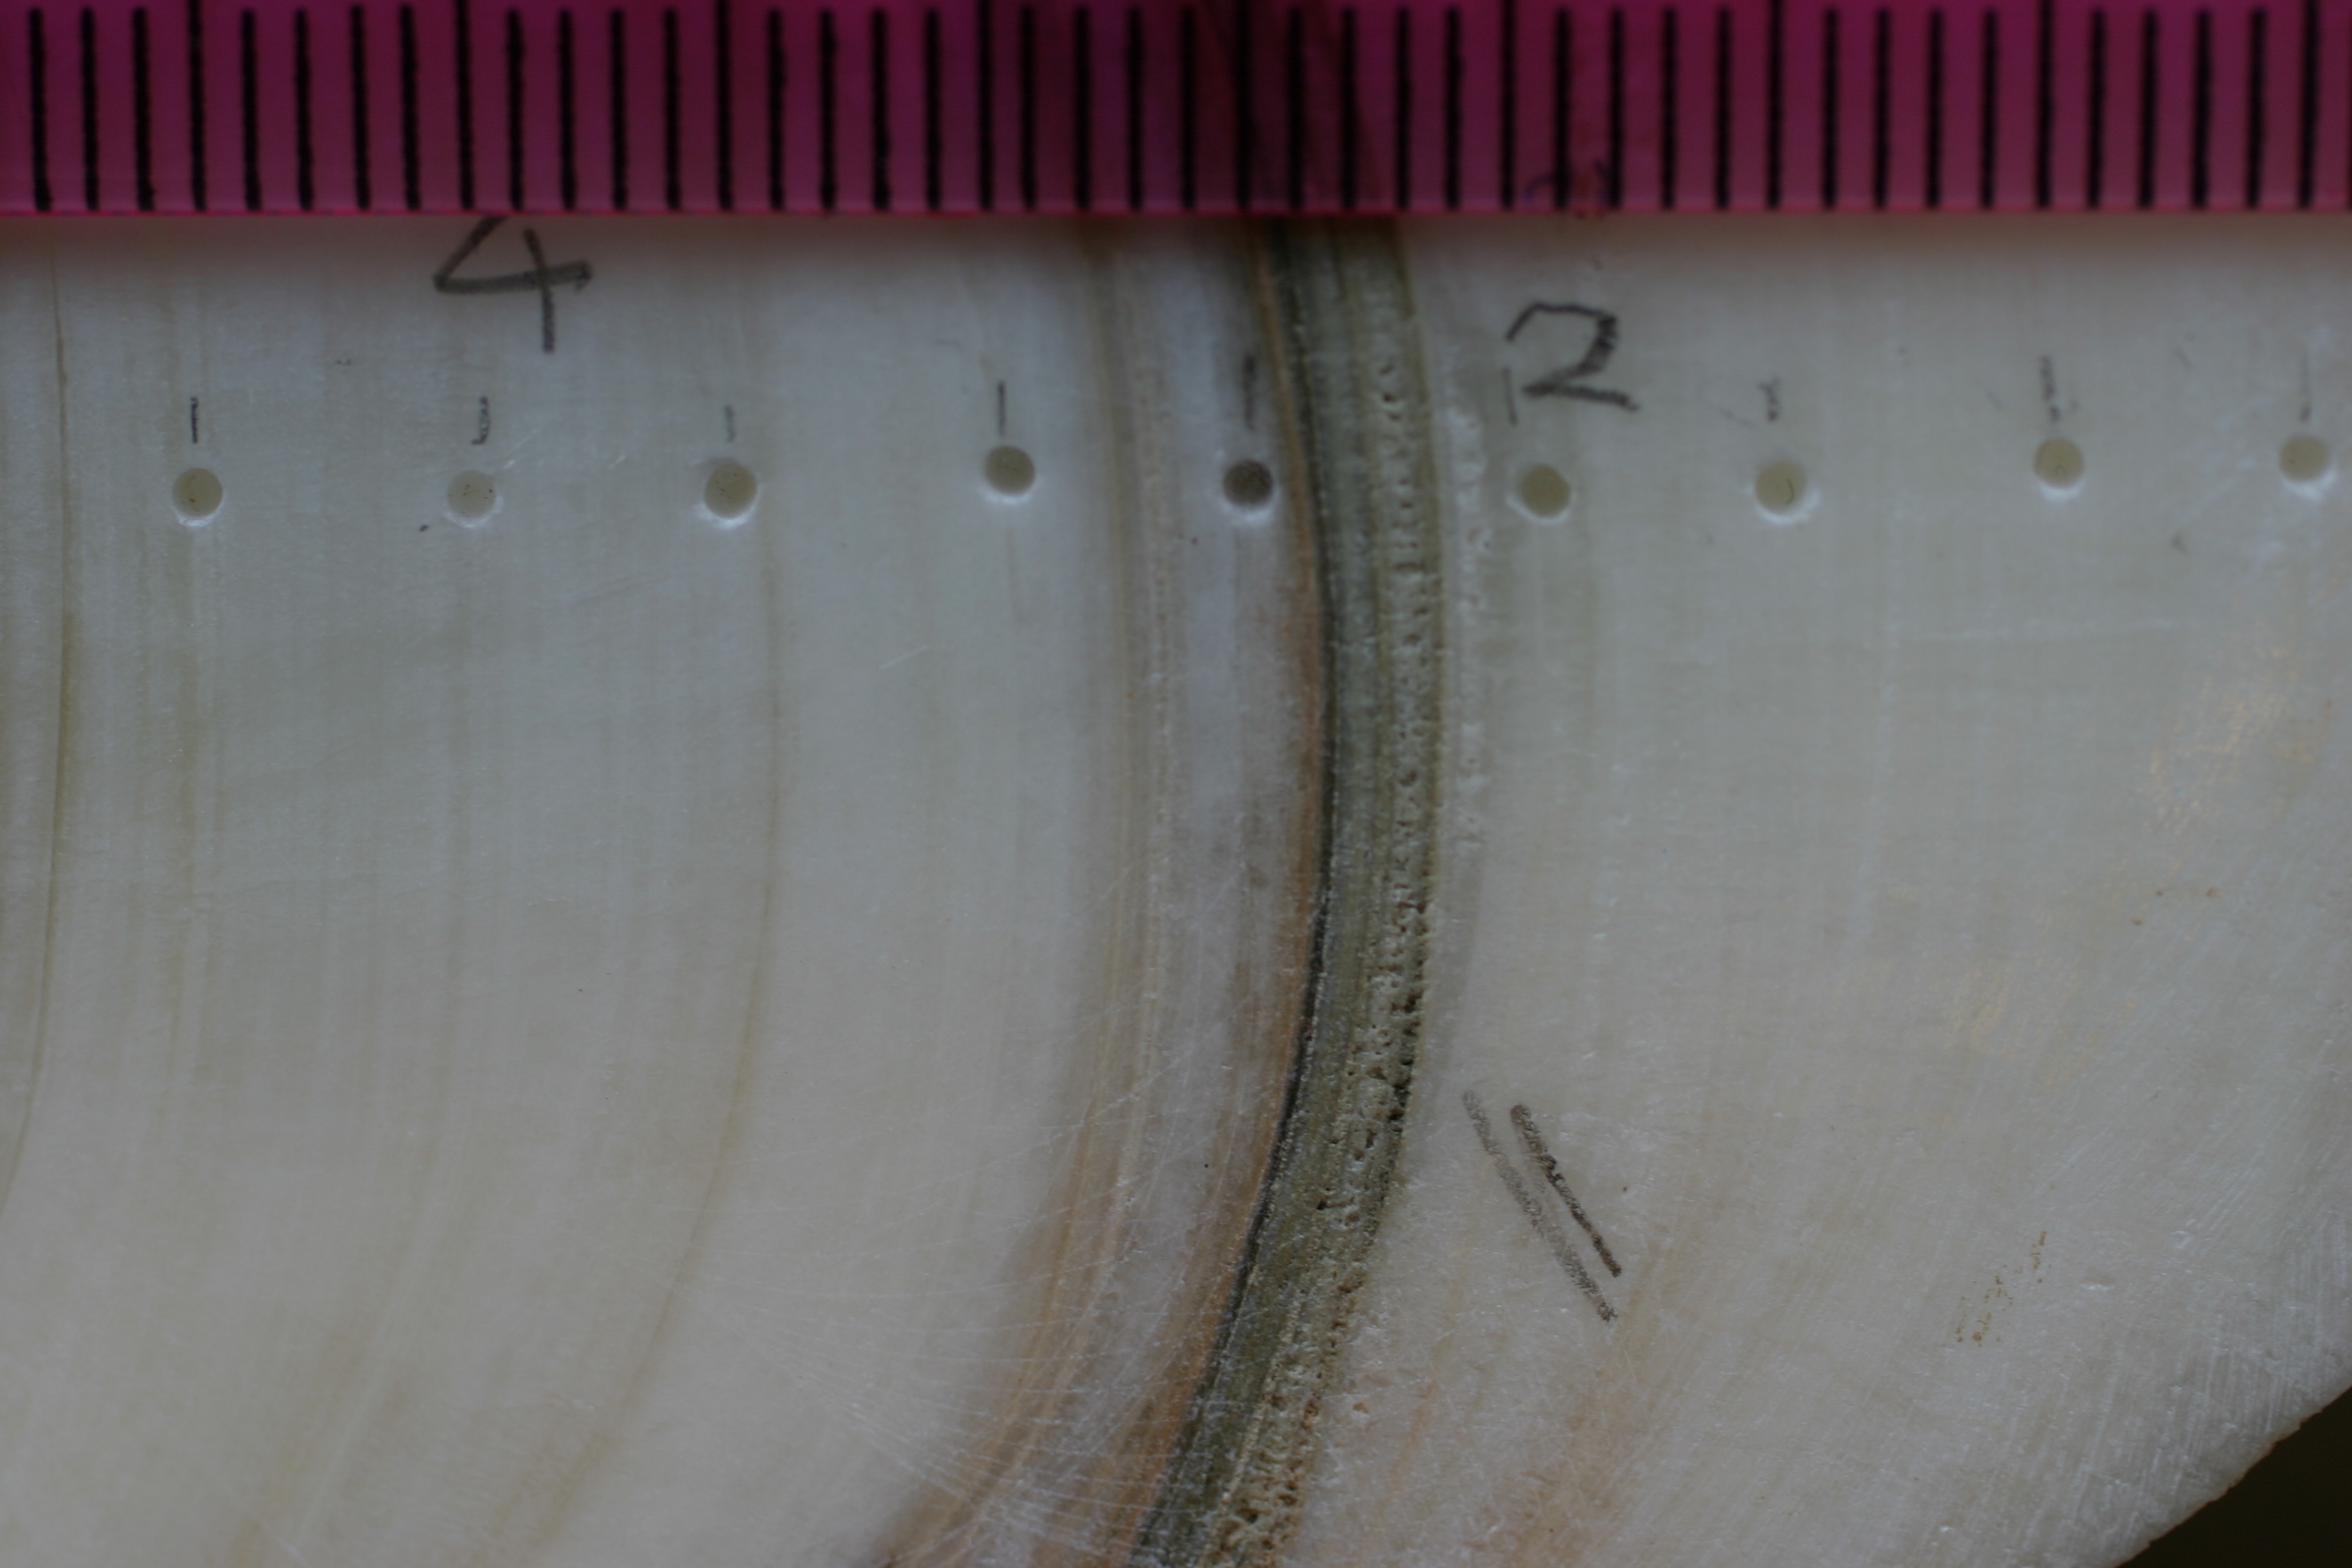 Speleothem Laminae Counting and Growth Rates